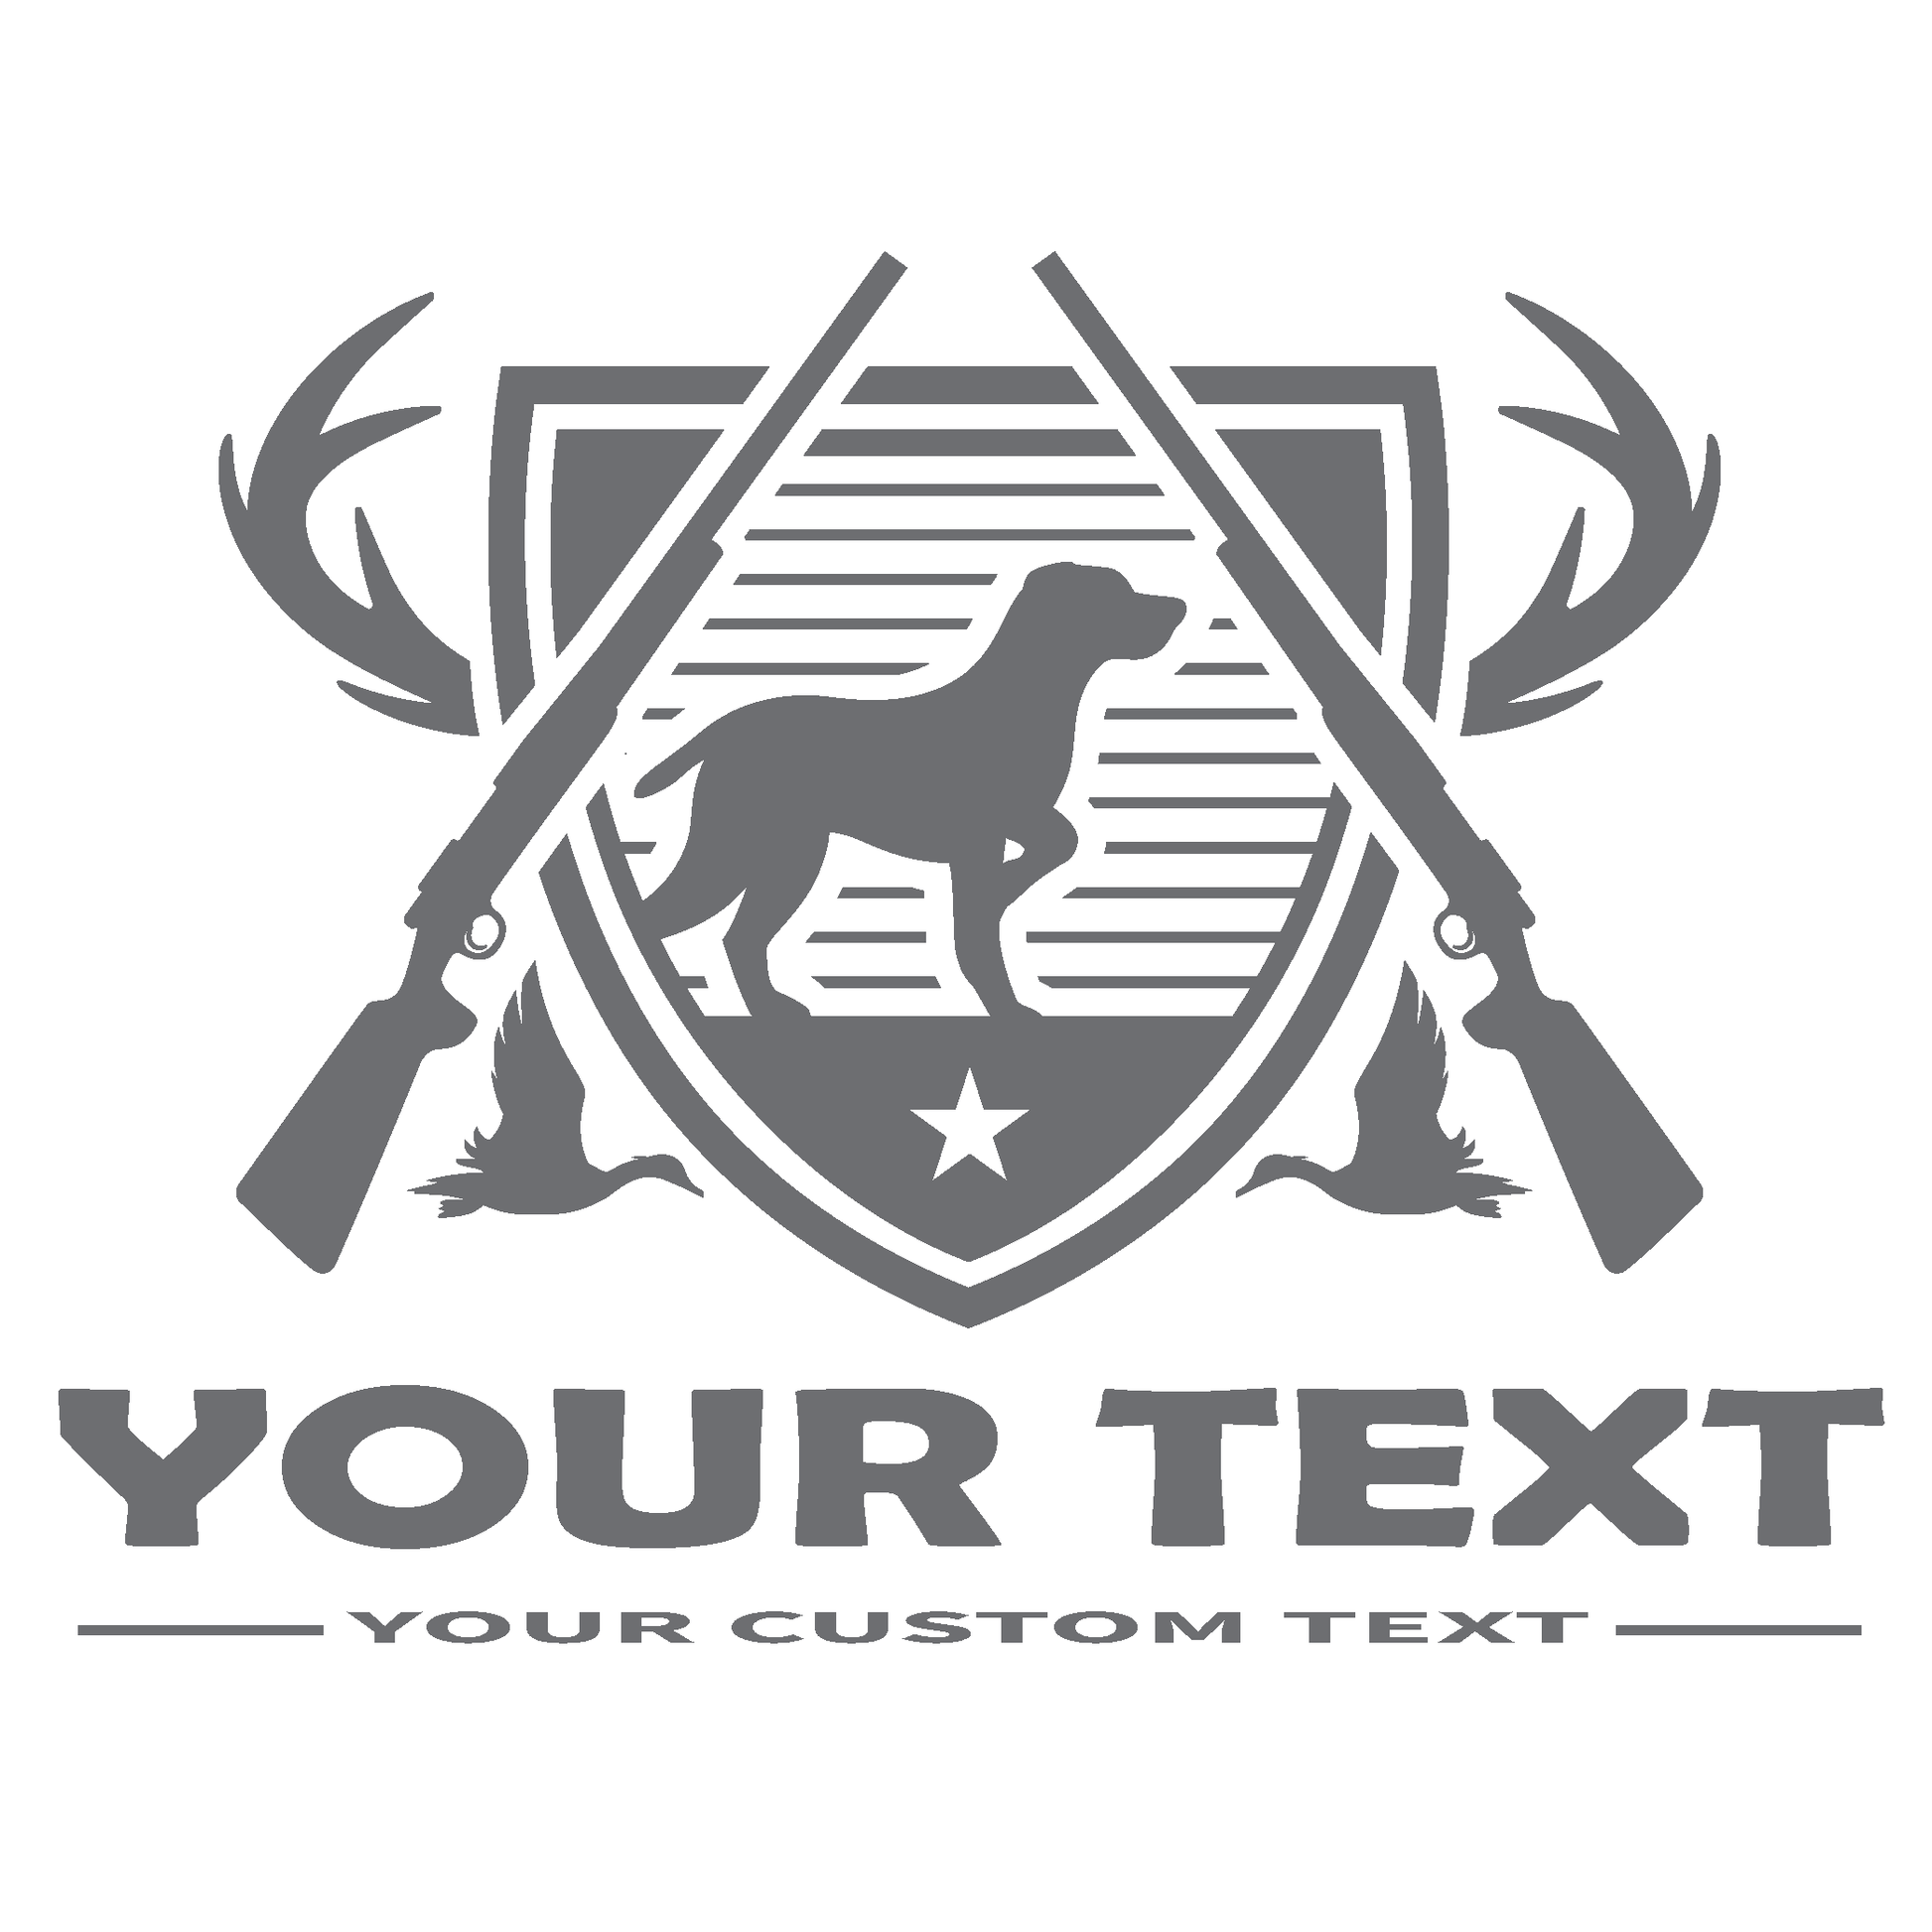 ShopVinylDesignStore.com CUSTOM TEXT with Hunting Dog and Guns for Corn Hole Boards Wide Style 24 Shop Vinyl Design decals stickers